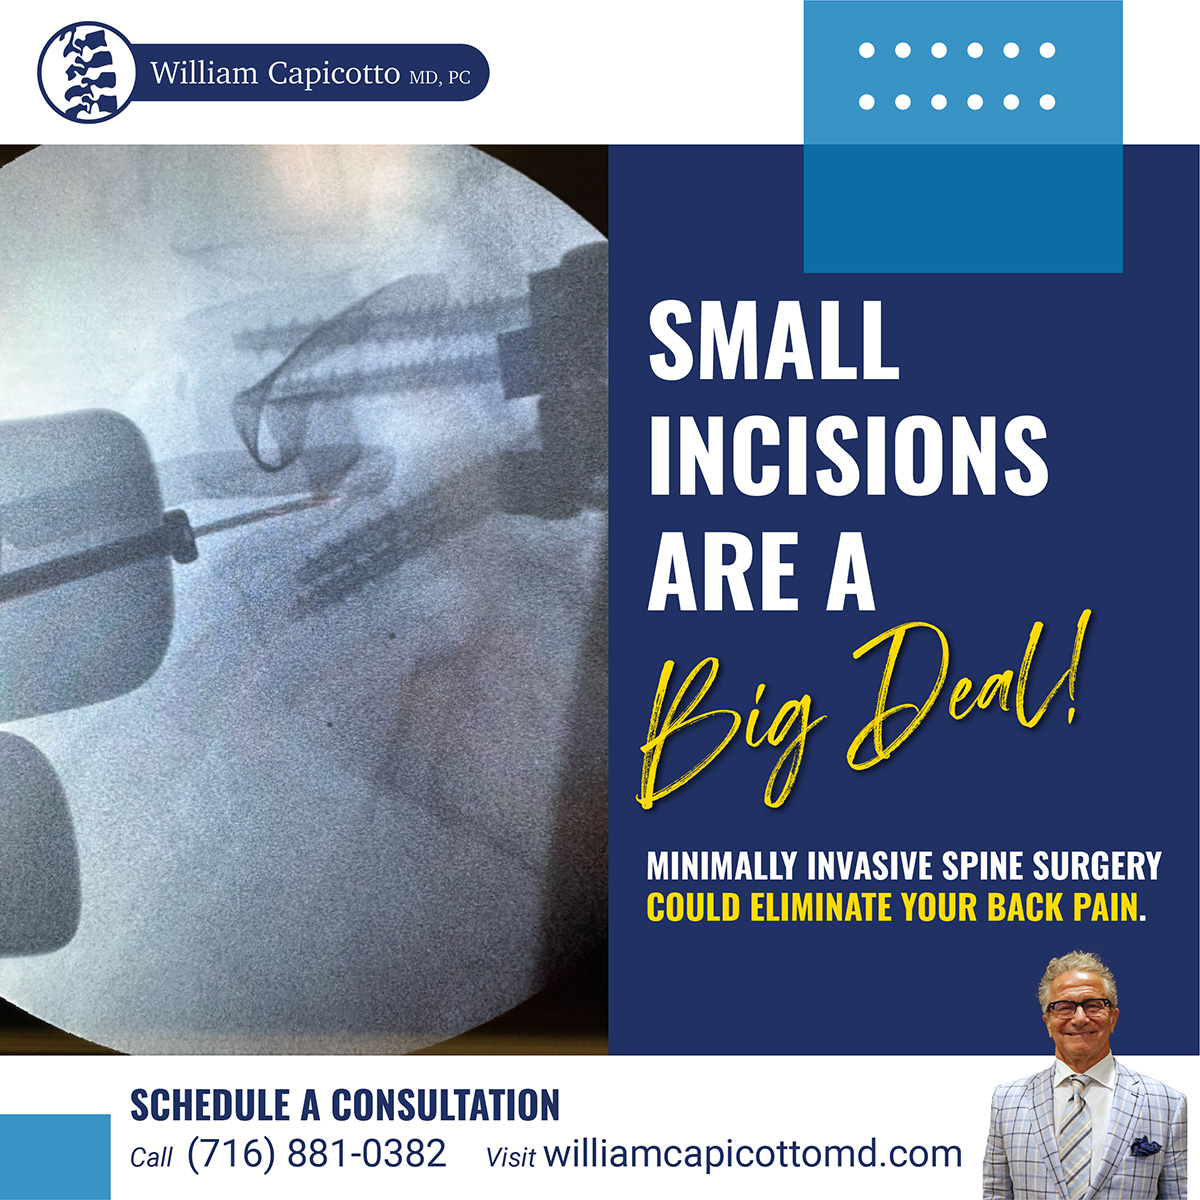 As the first spinal surgeon in Western New York to be certified in endoscopic spine surgery, we believe that small incisions are a BIG DEAL.